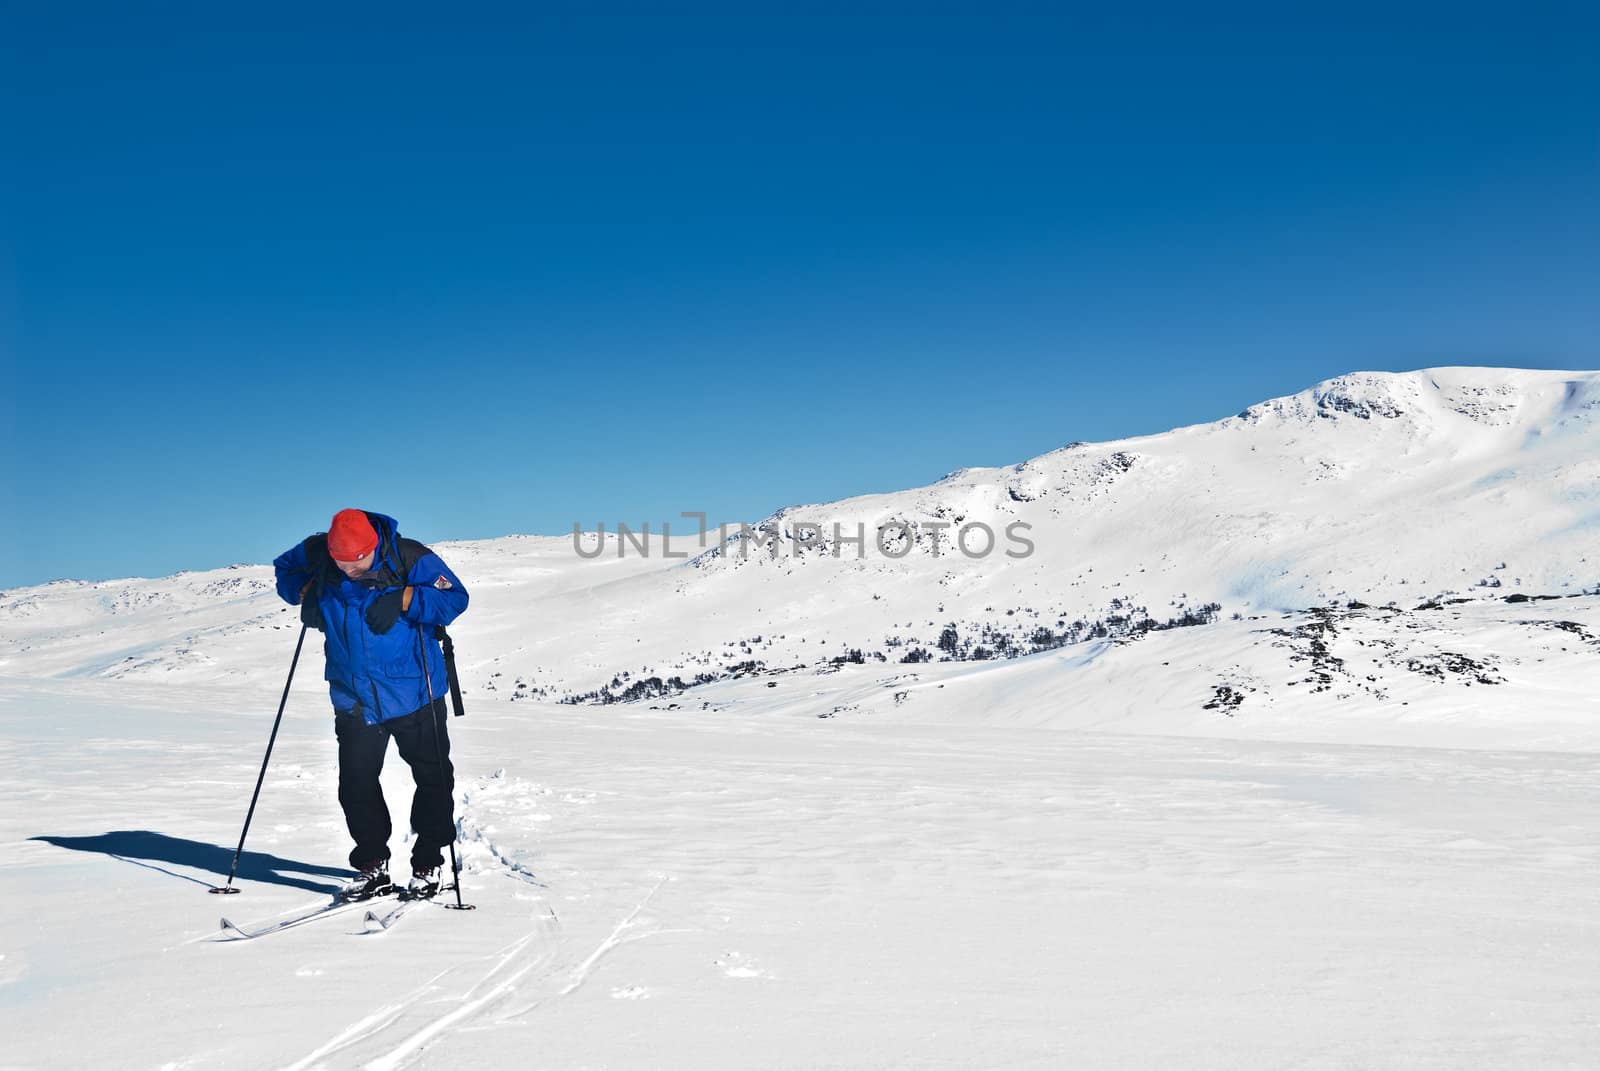 Single skier resting. A typical Norwegian winter landscape as the beautiful background. Picture taken in Oppdal, Norway.